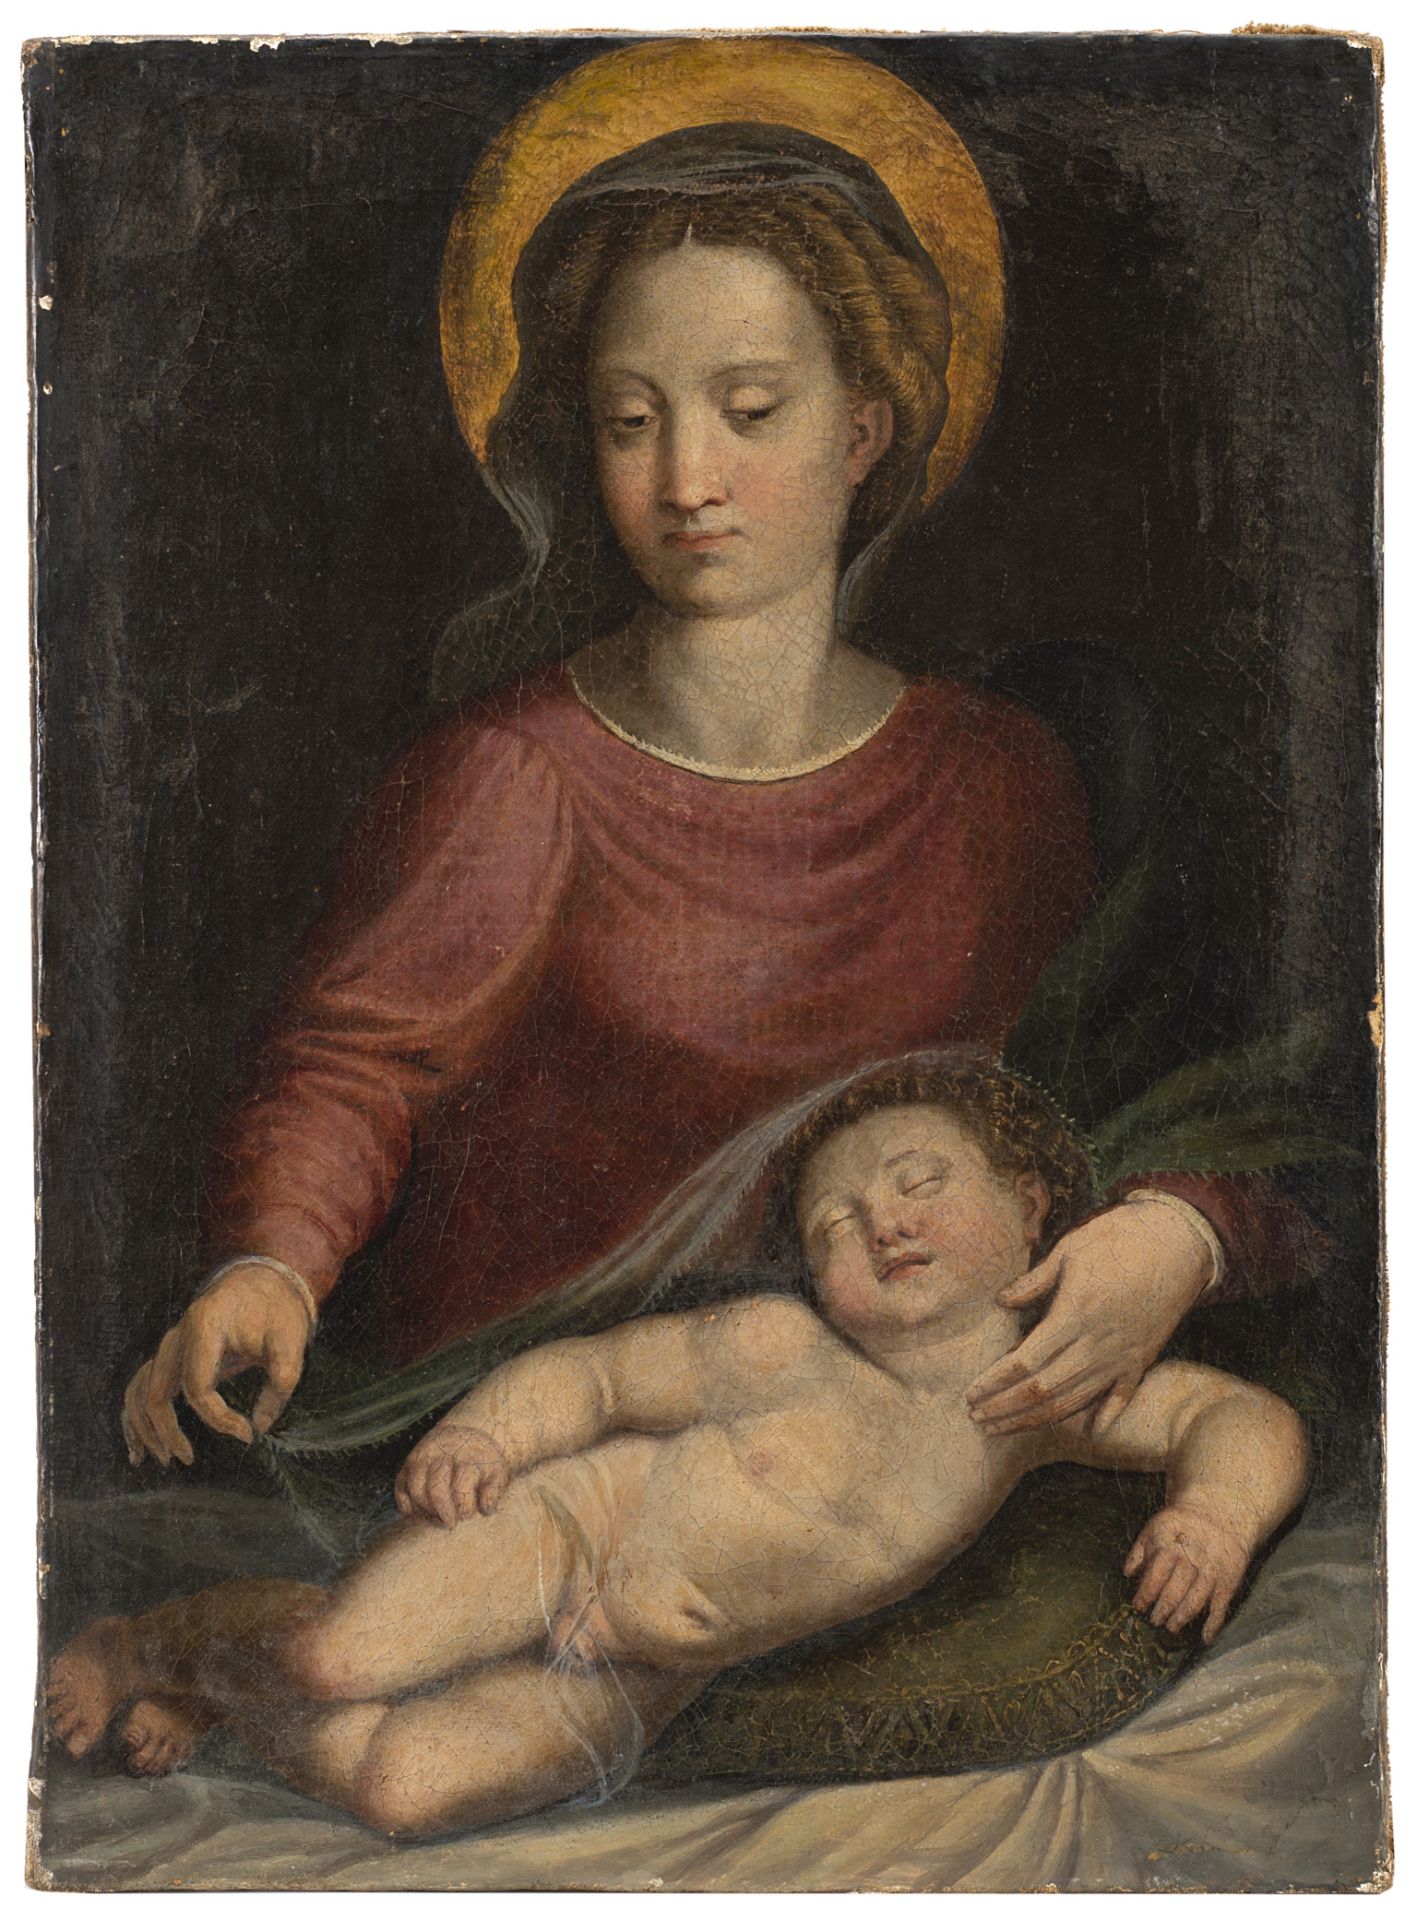 North Italian School, early 17th Century The Madonna with the sleeping Christ Child